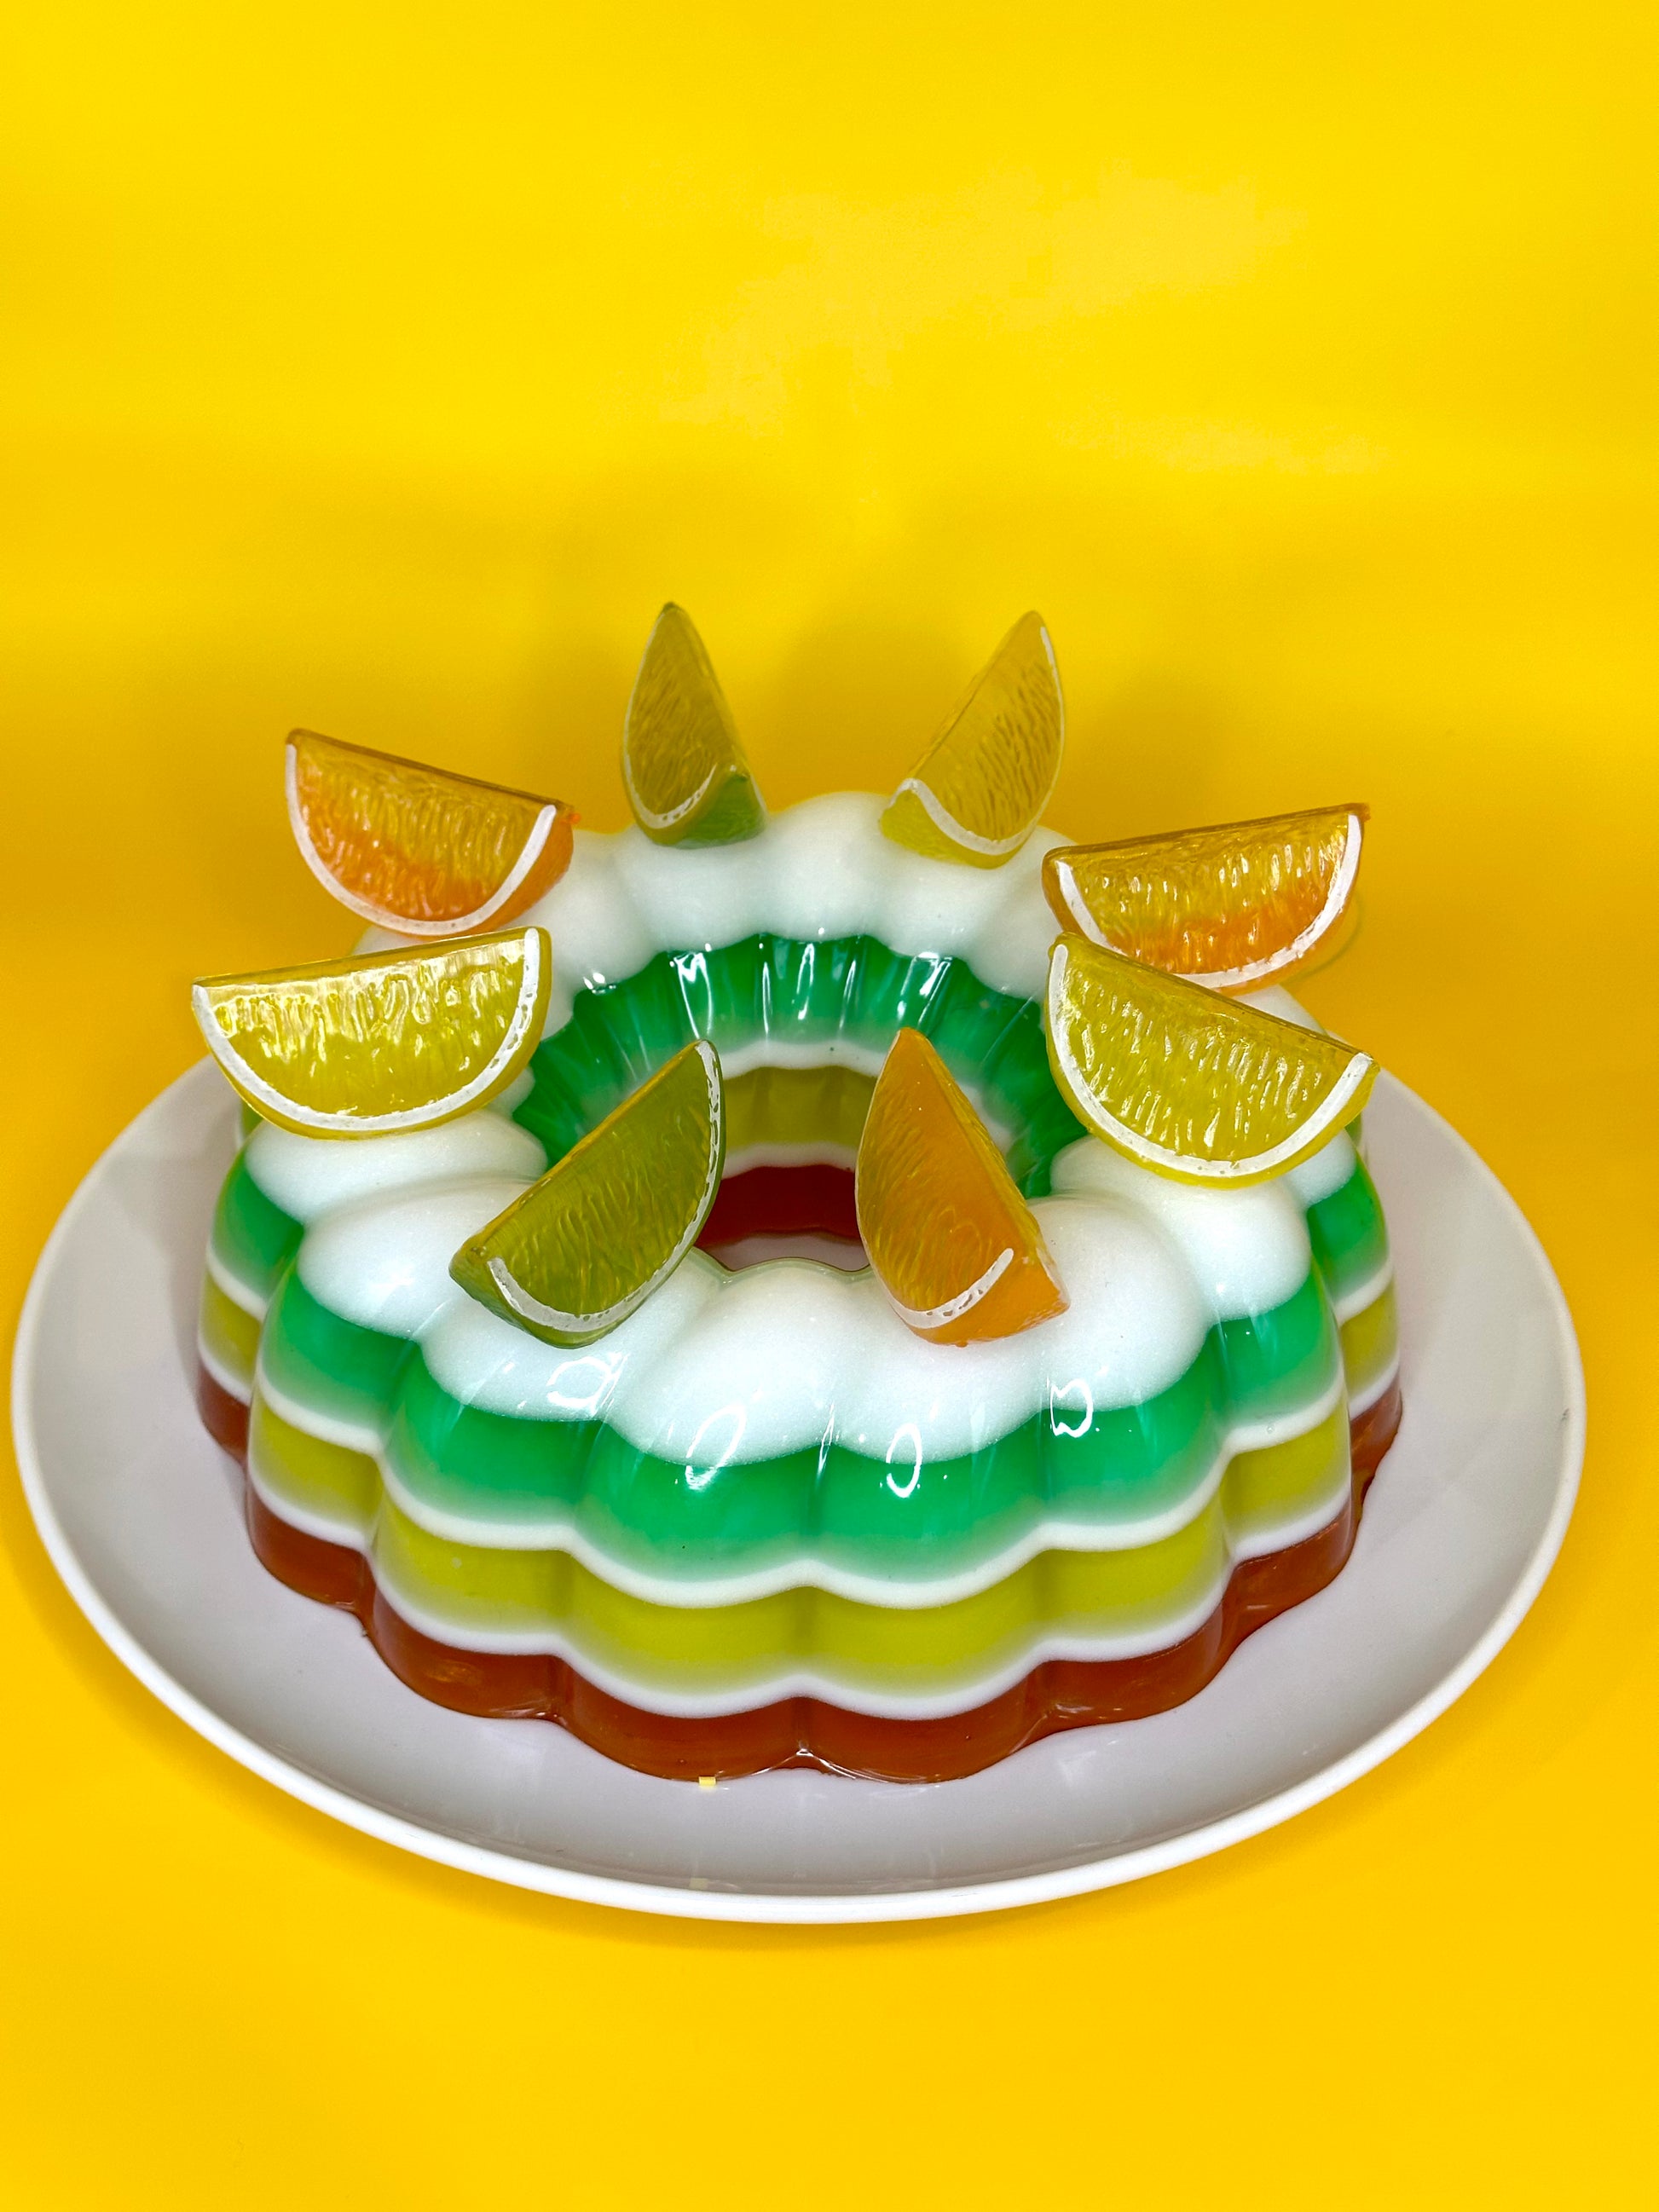 Large Citus Jello Mold in 3 colors and built-in Light